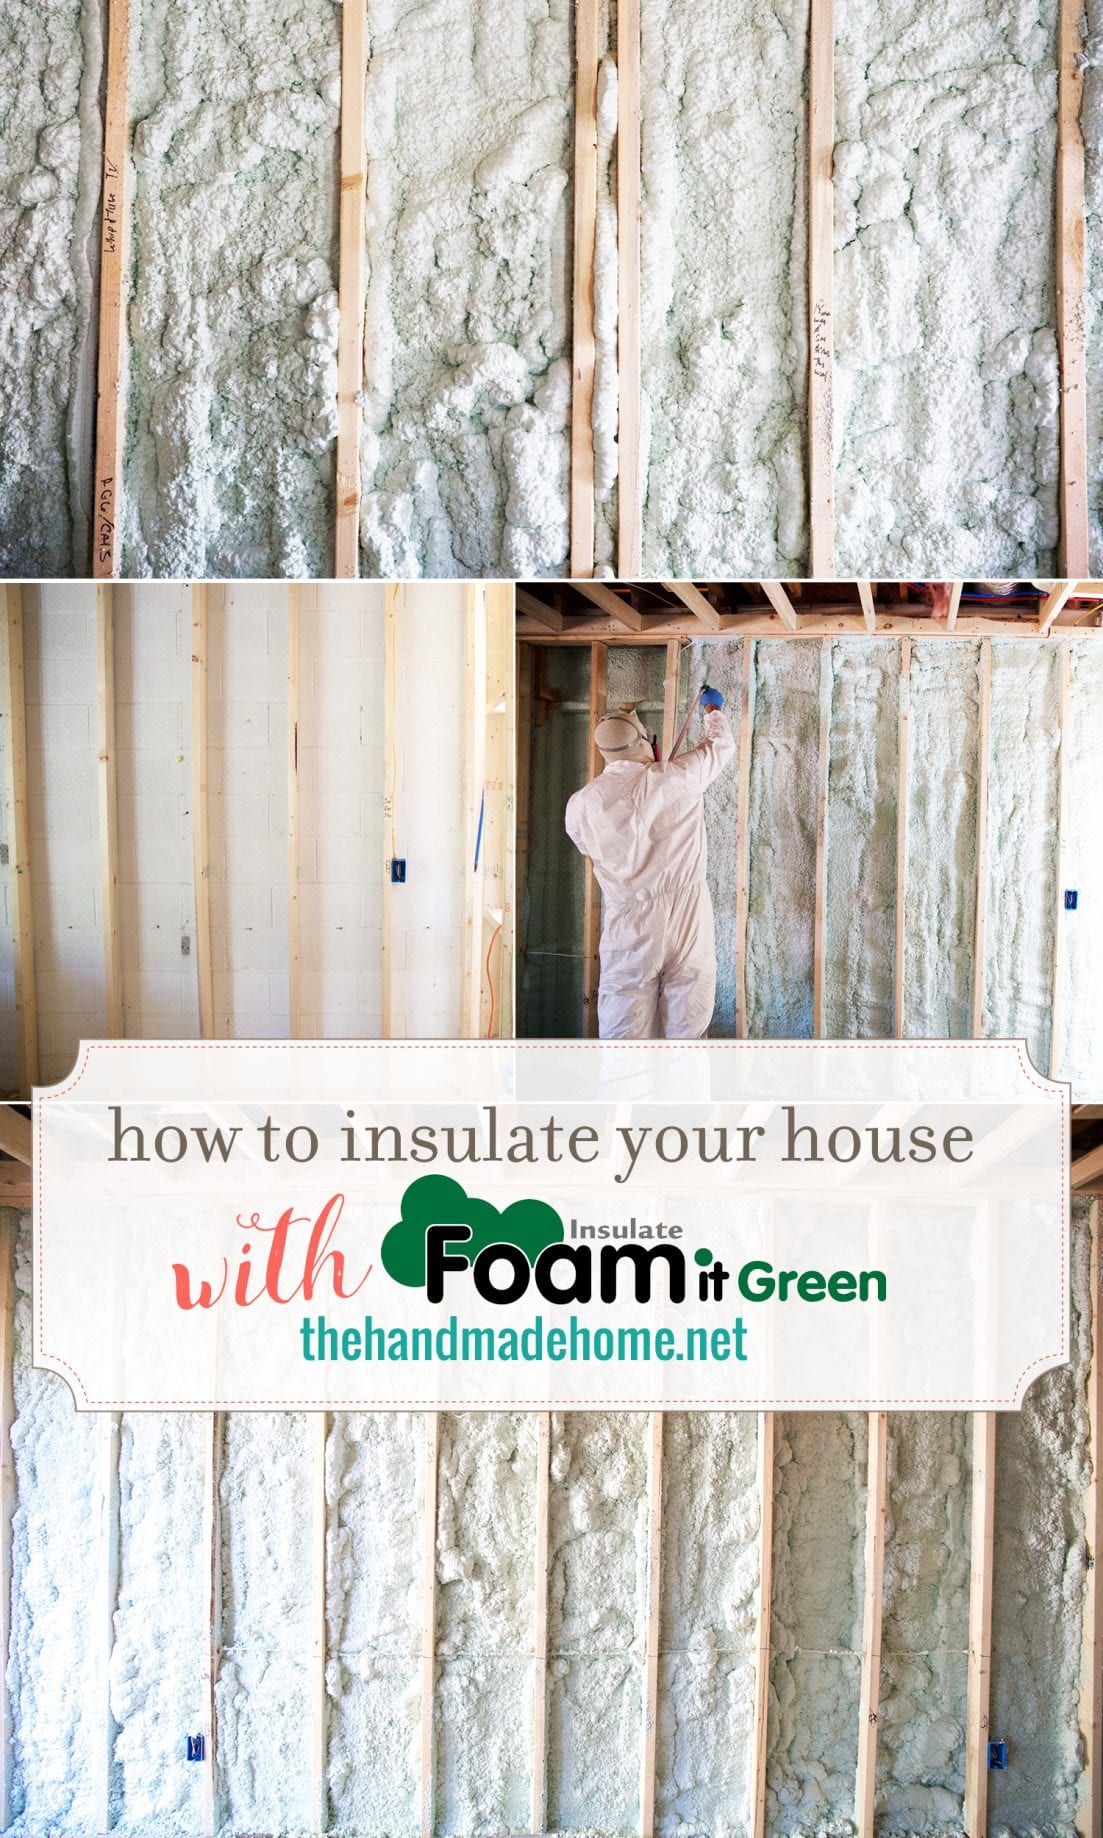 how to use spray insulation - foam it green - insulate you your home